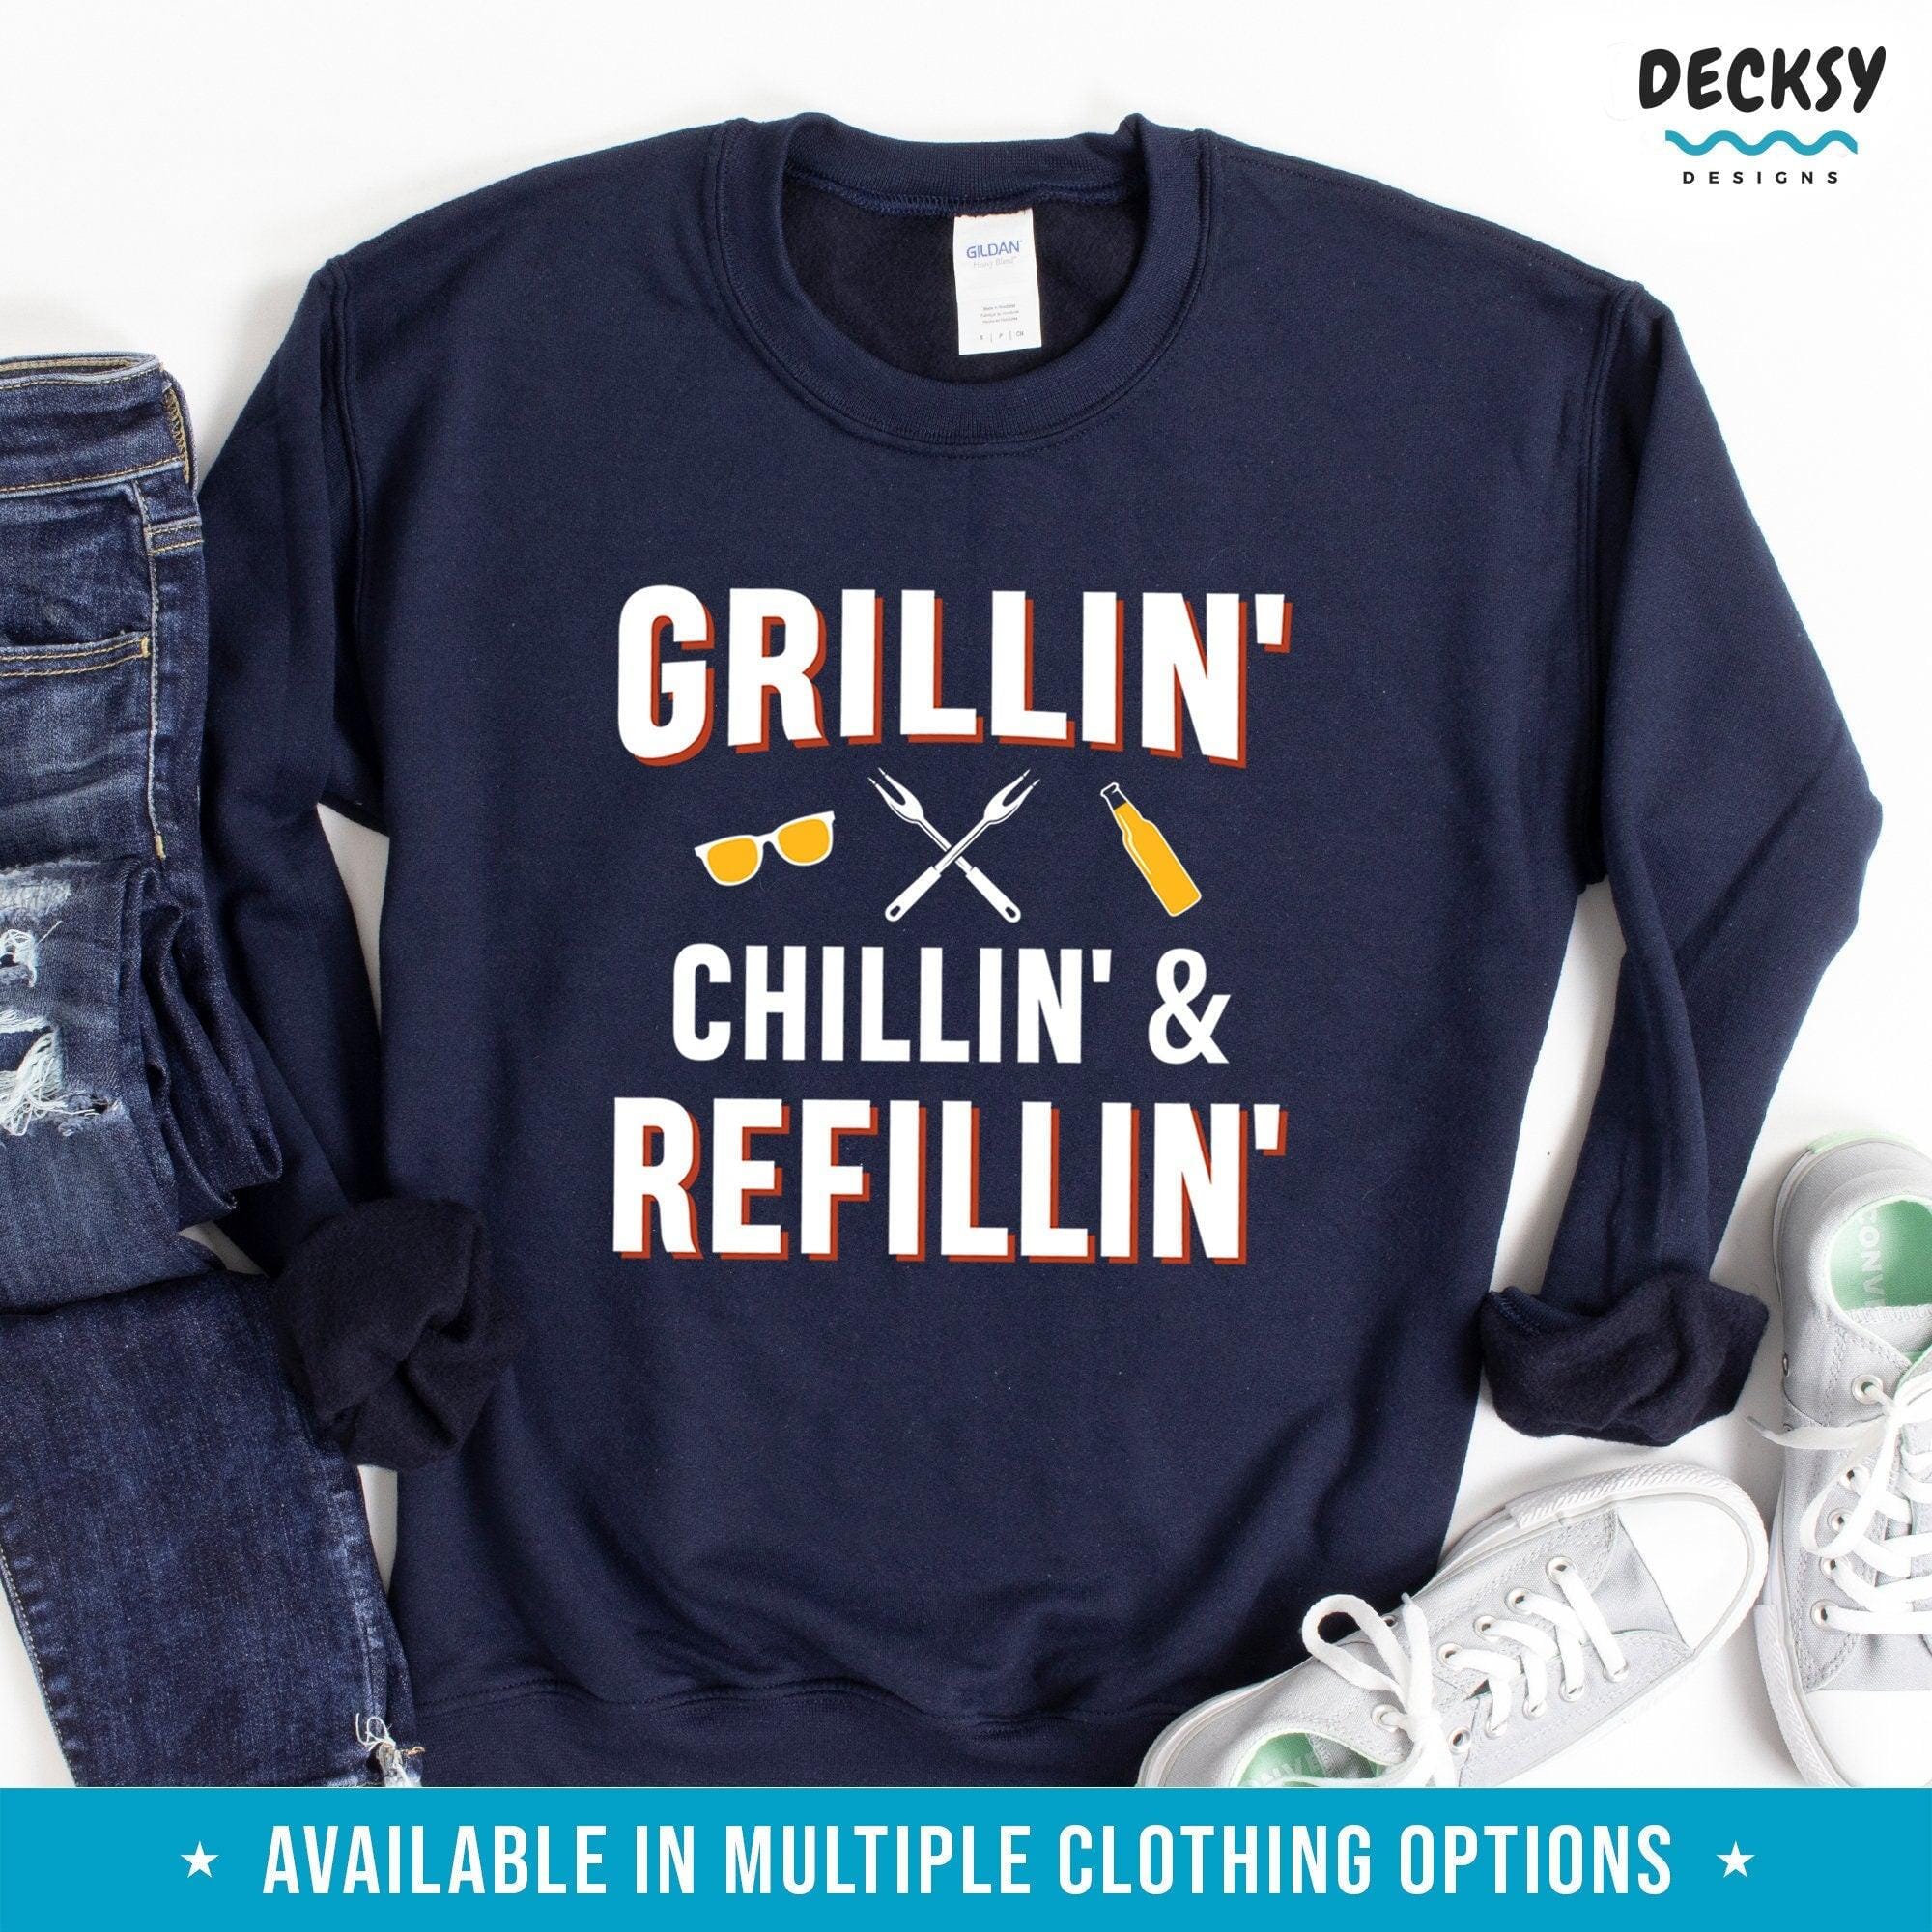 Bbq Shirt, Grill Master Gift-Clothing:Gender-Neutral Adult Clothing:Tops & Tees:T-shirts:Graphic Tees-DecksyDesigns